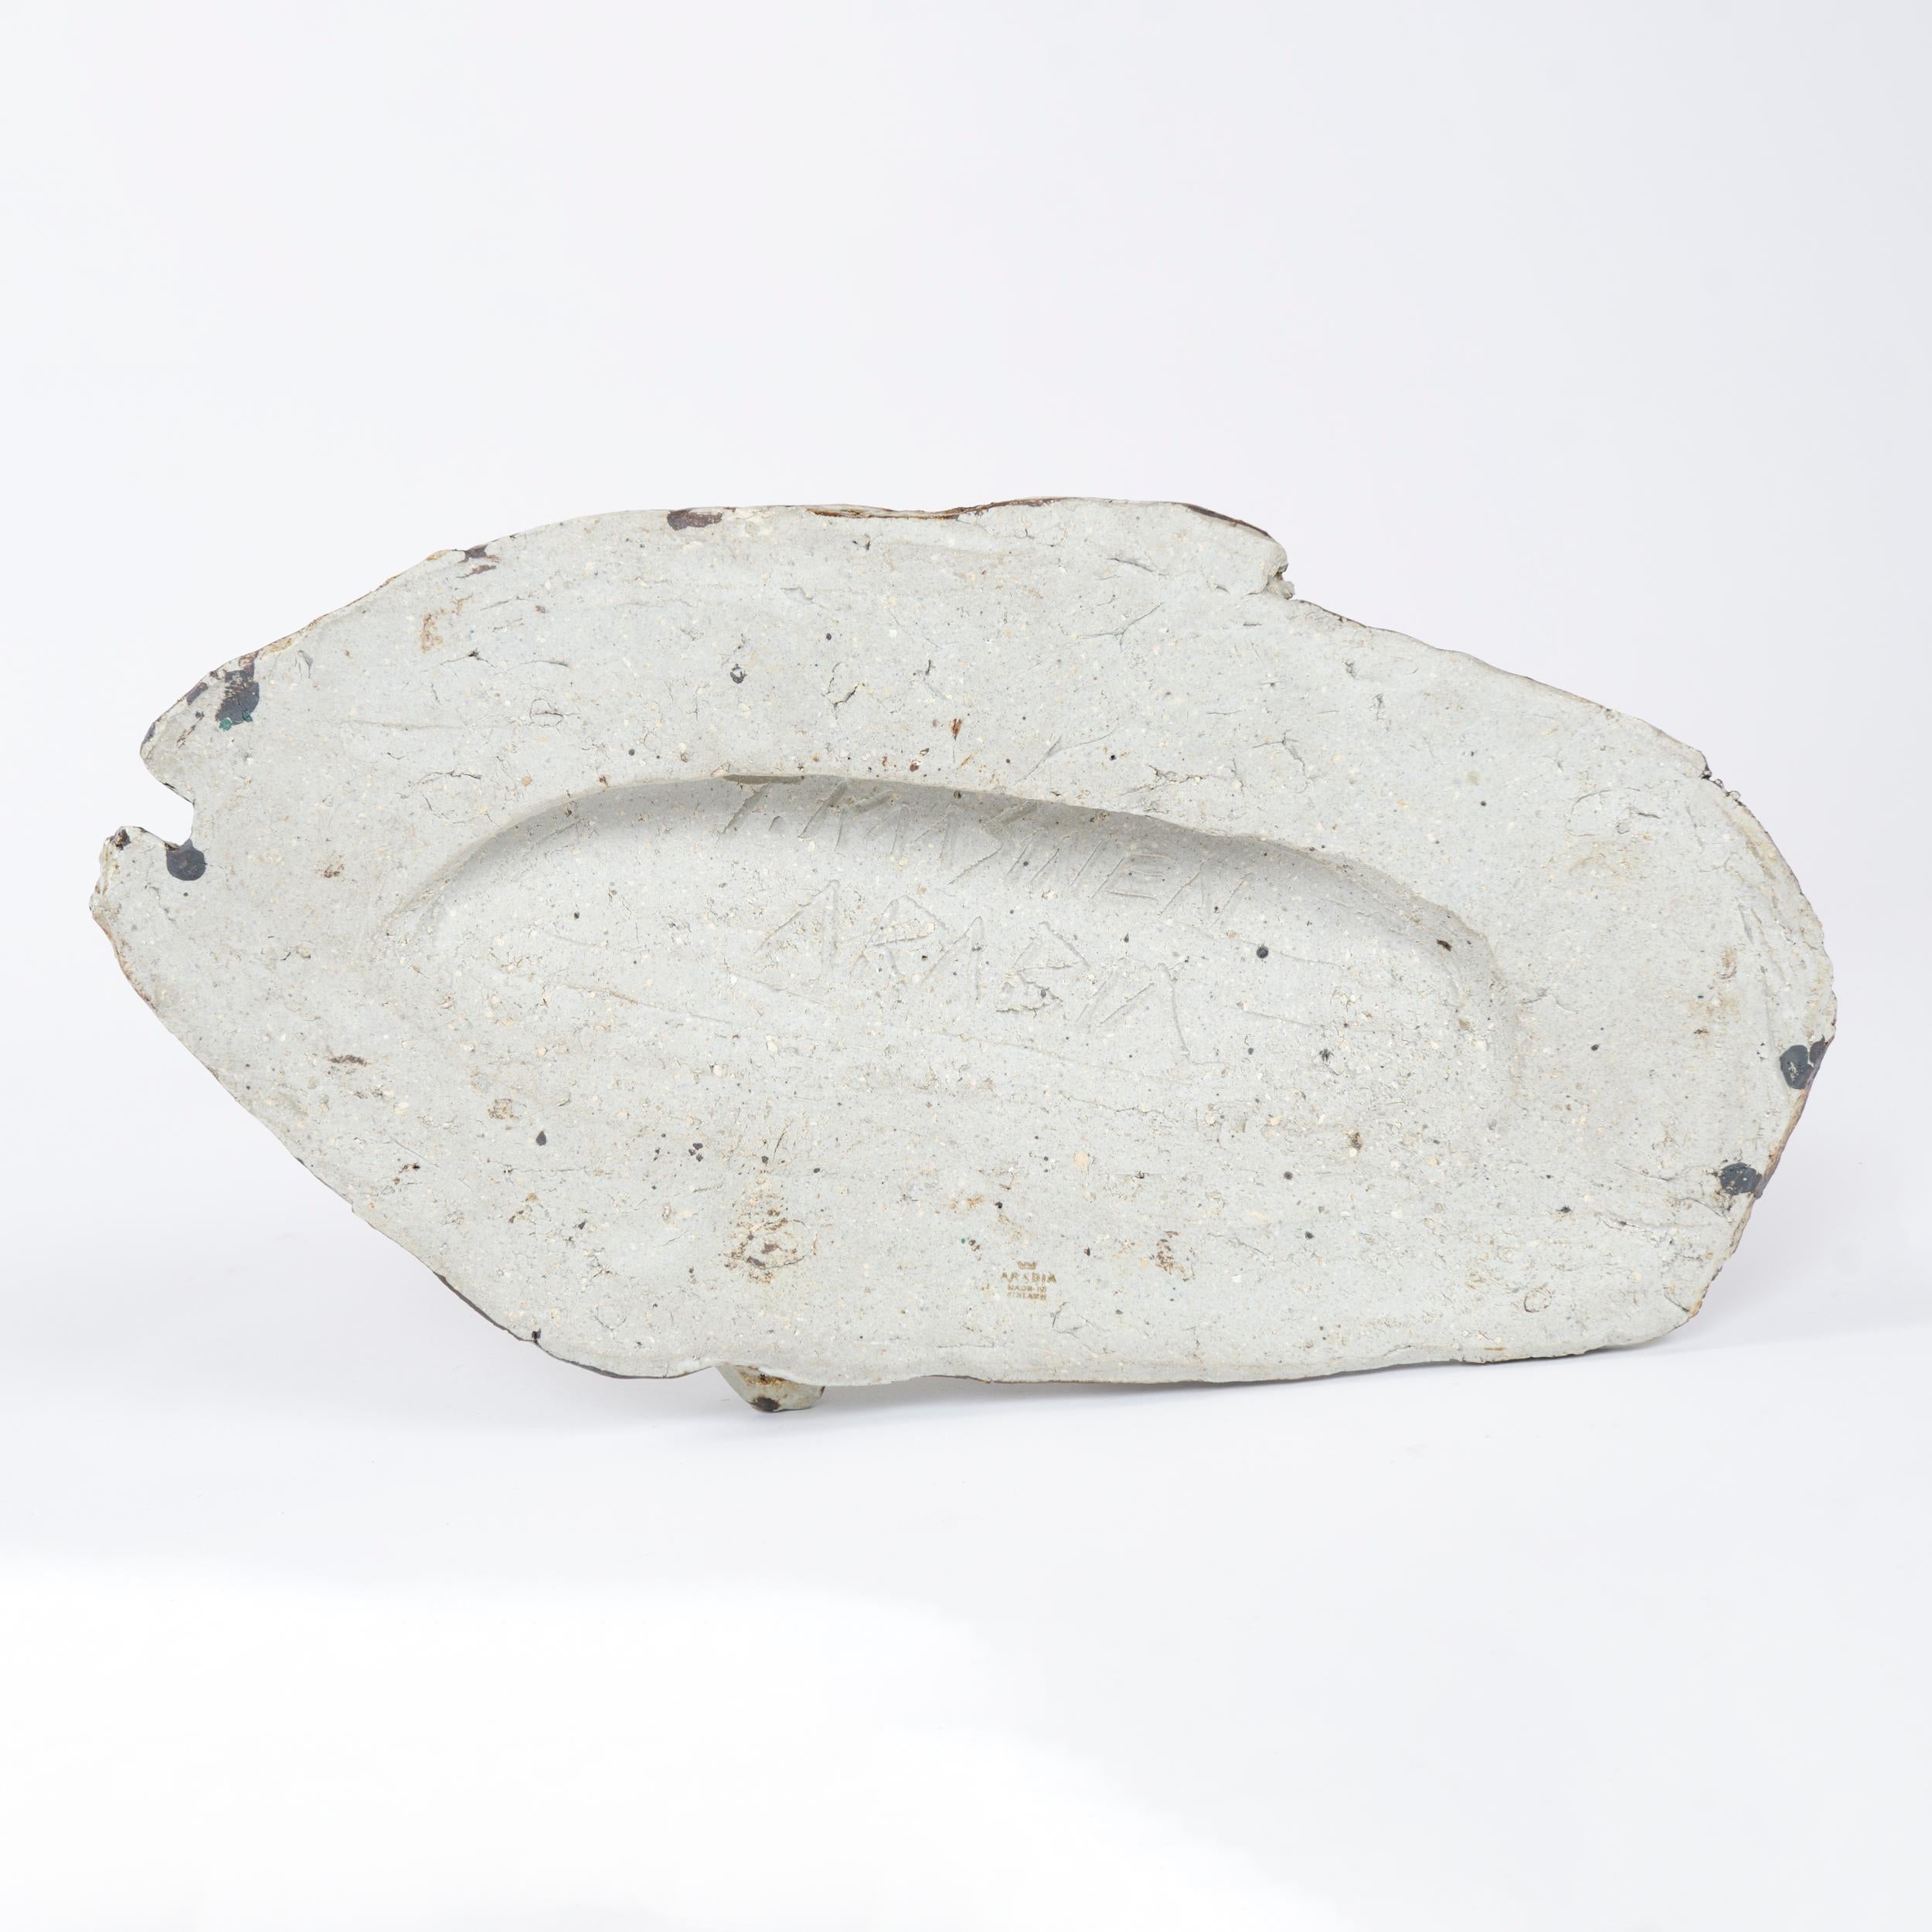 1960s Finnish Fossilized Fish Sculpture by Taisto Kaasinen for Arabia In Good Condition For Sale In Sagaponack, NY